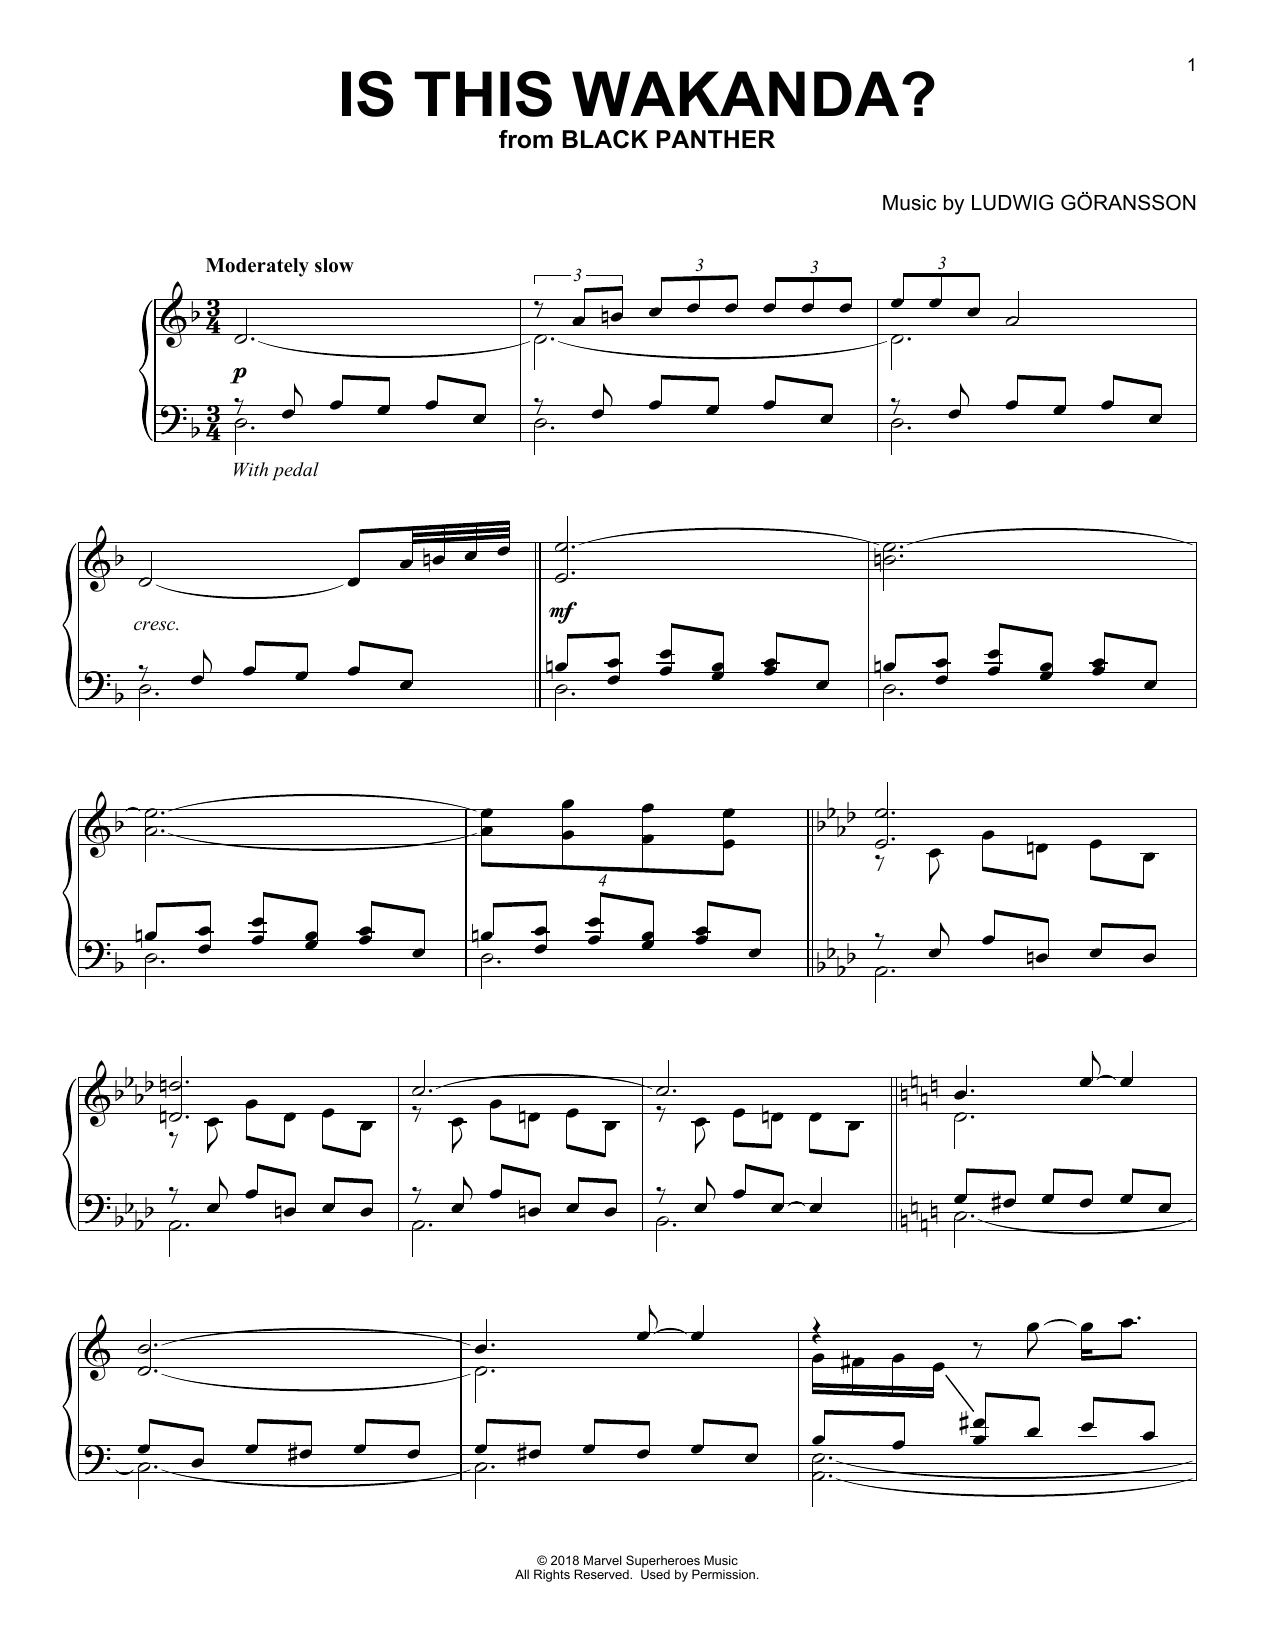 Download Ludwig Goransson Is This Wakanda? (from Black Panther) Sheet Music